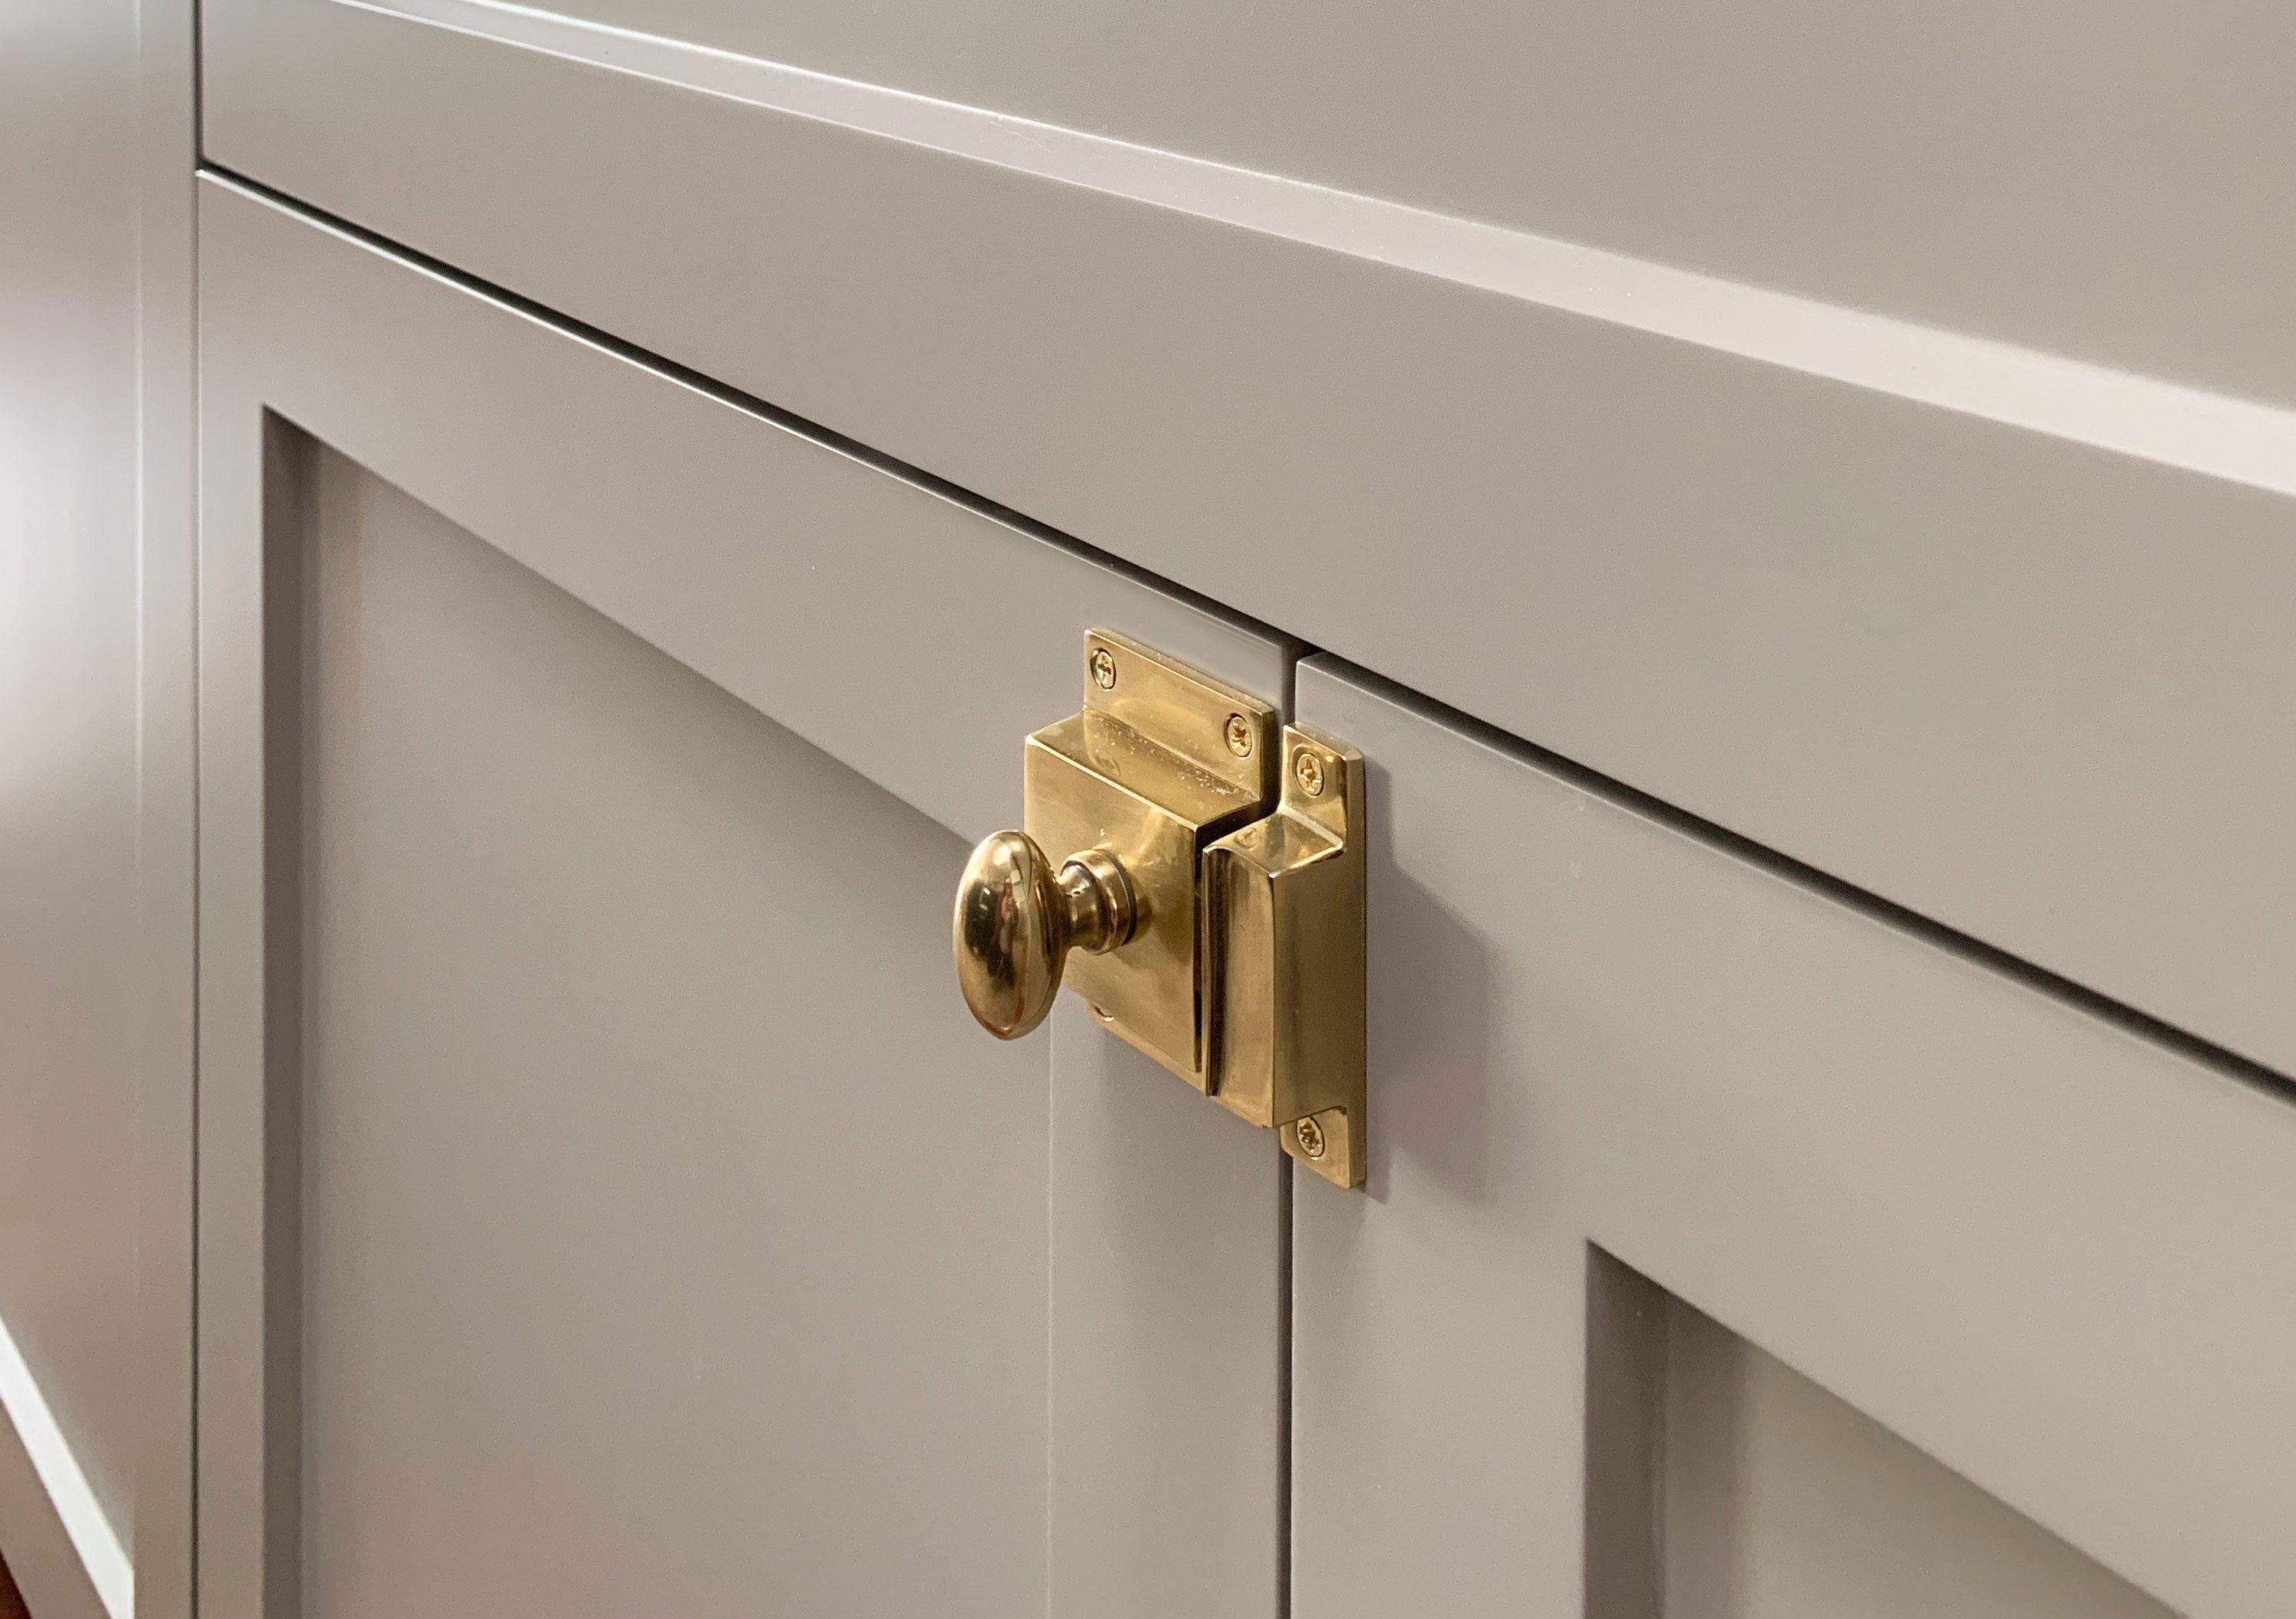 How To: Measure Center to Center Spacing for Cabinet Hardware